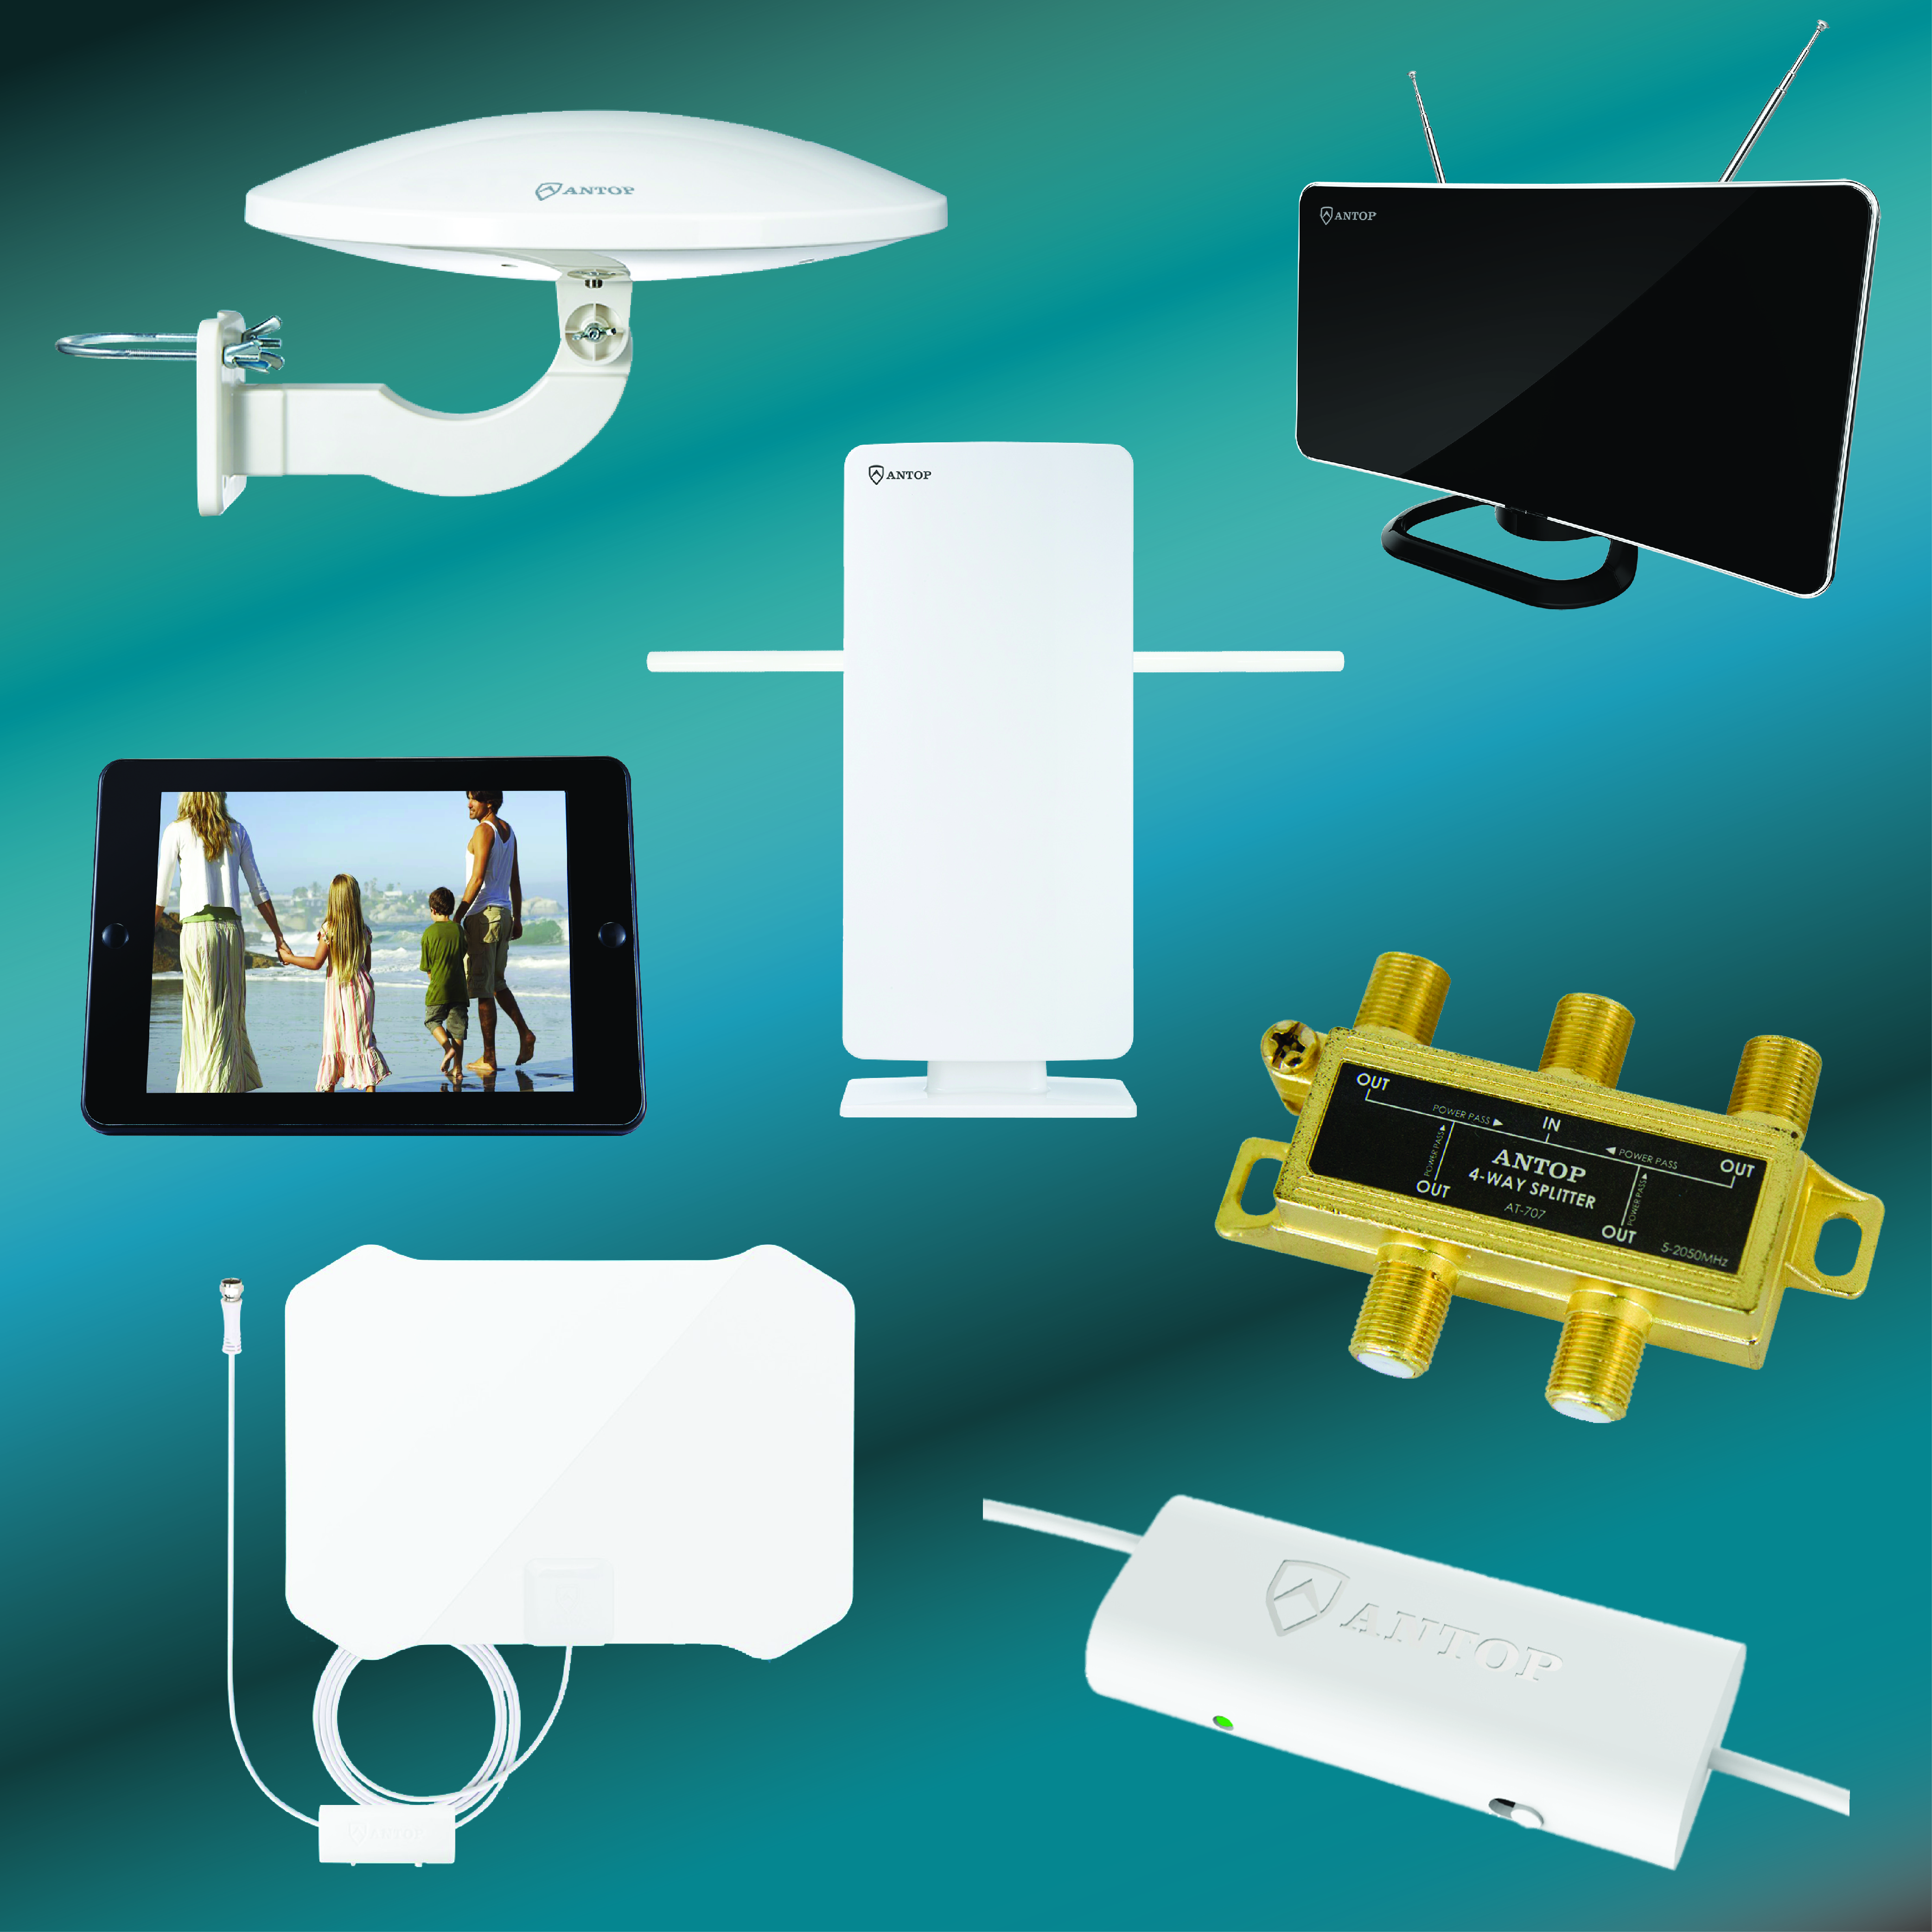 ANTOP Antenna, a global leader in the development of digital indoor and outdoor HDTV antennas utilizes the latest technology and design to provide consumers with greater options to enjoy free local Over-The-Air broadcasts and cut the cord from high priced pay TV services. 